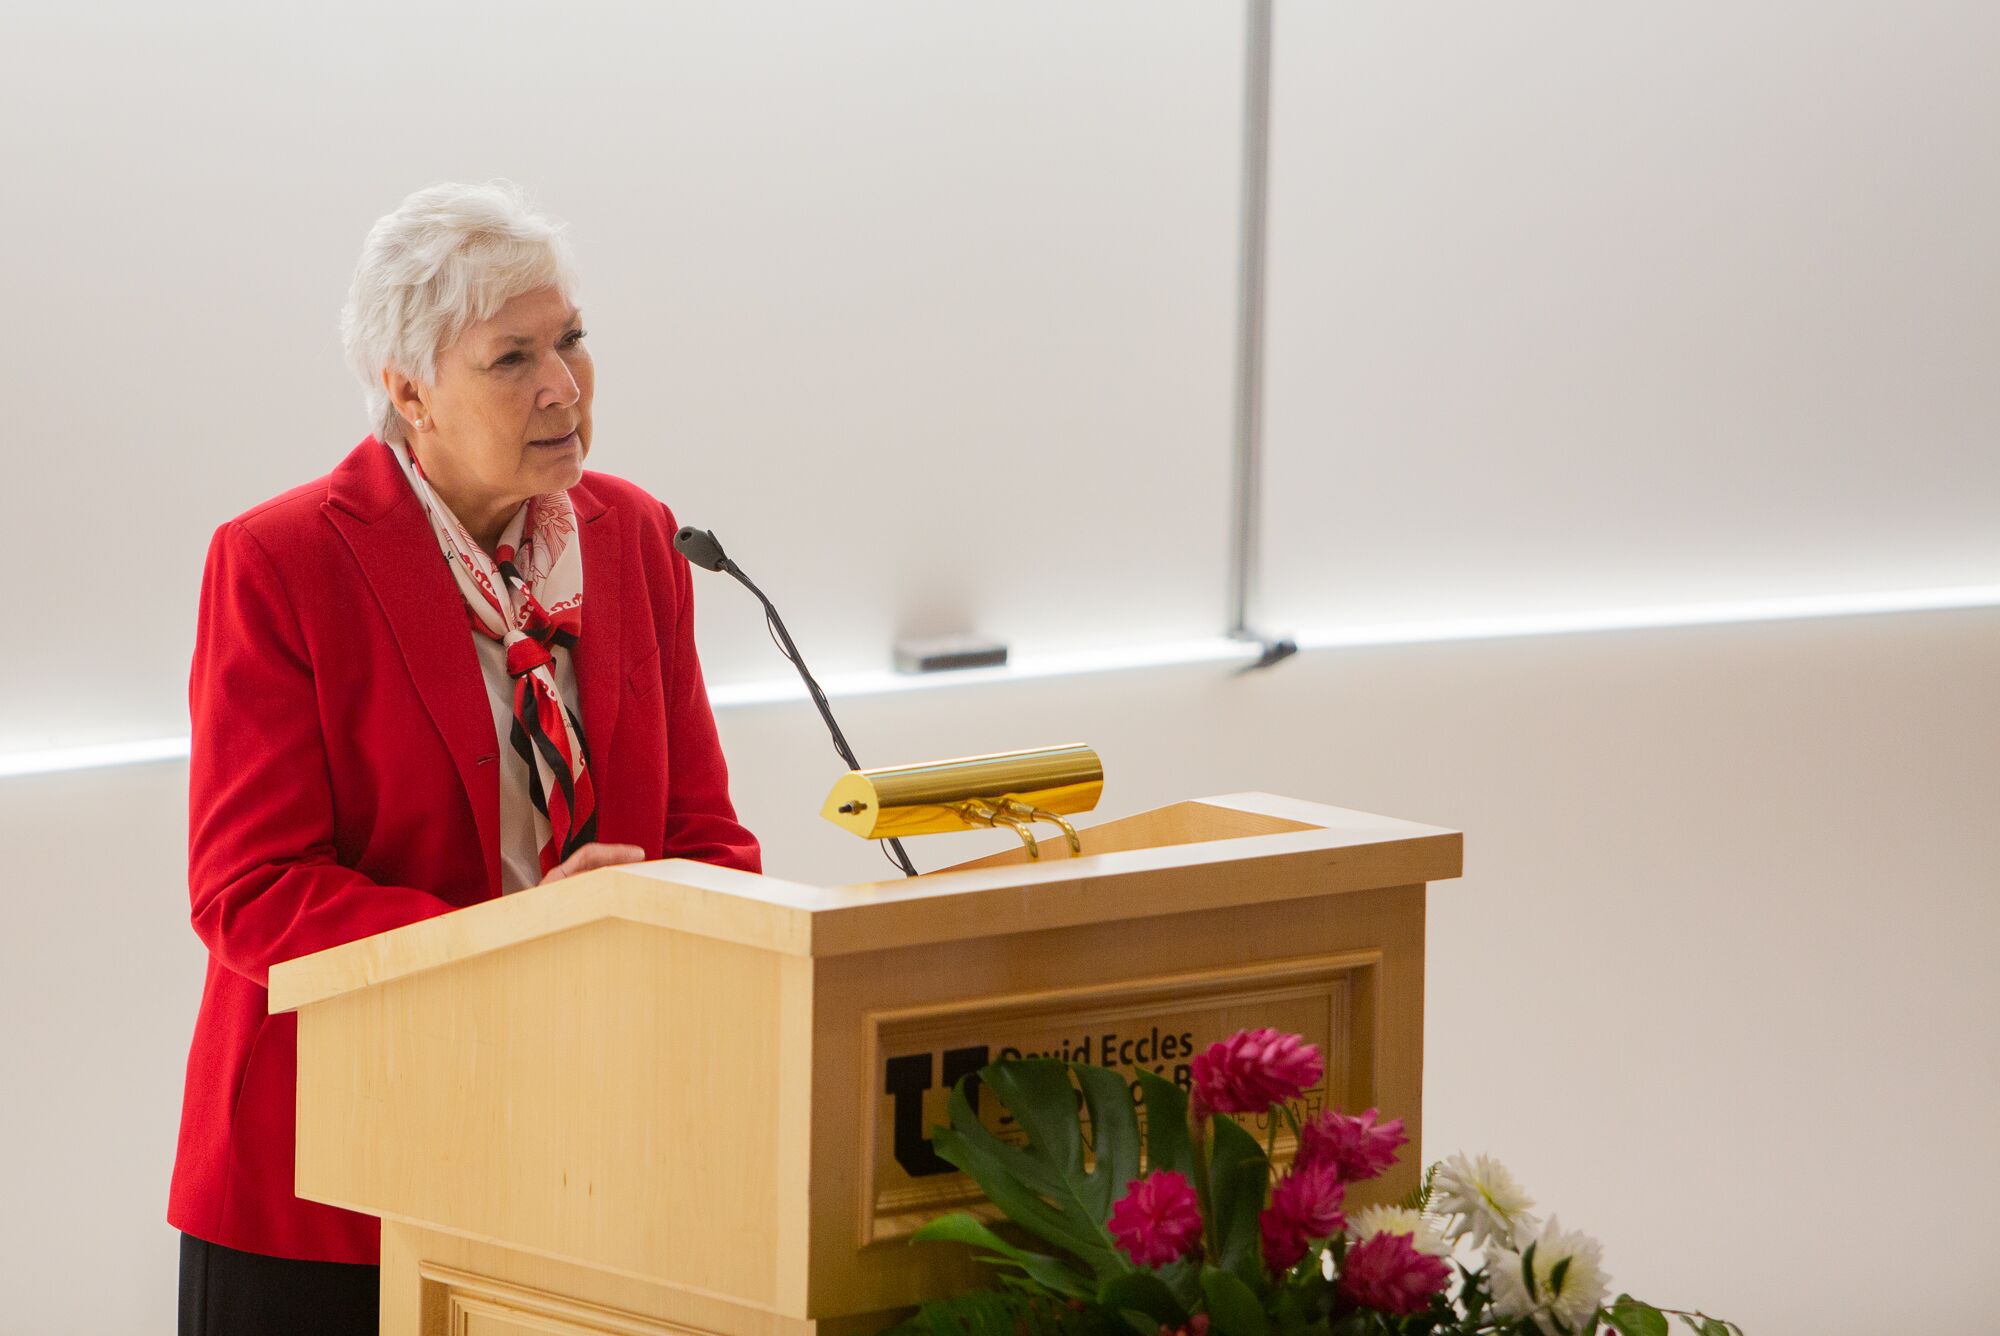 Gail Miller is the keynote speaker at the Spencer Fox Eccles Convocation